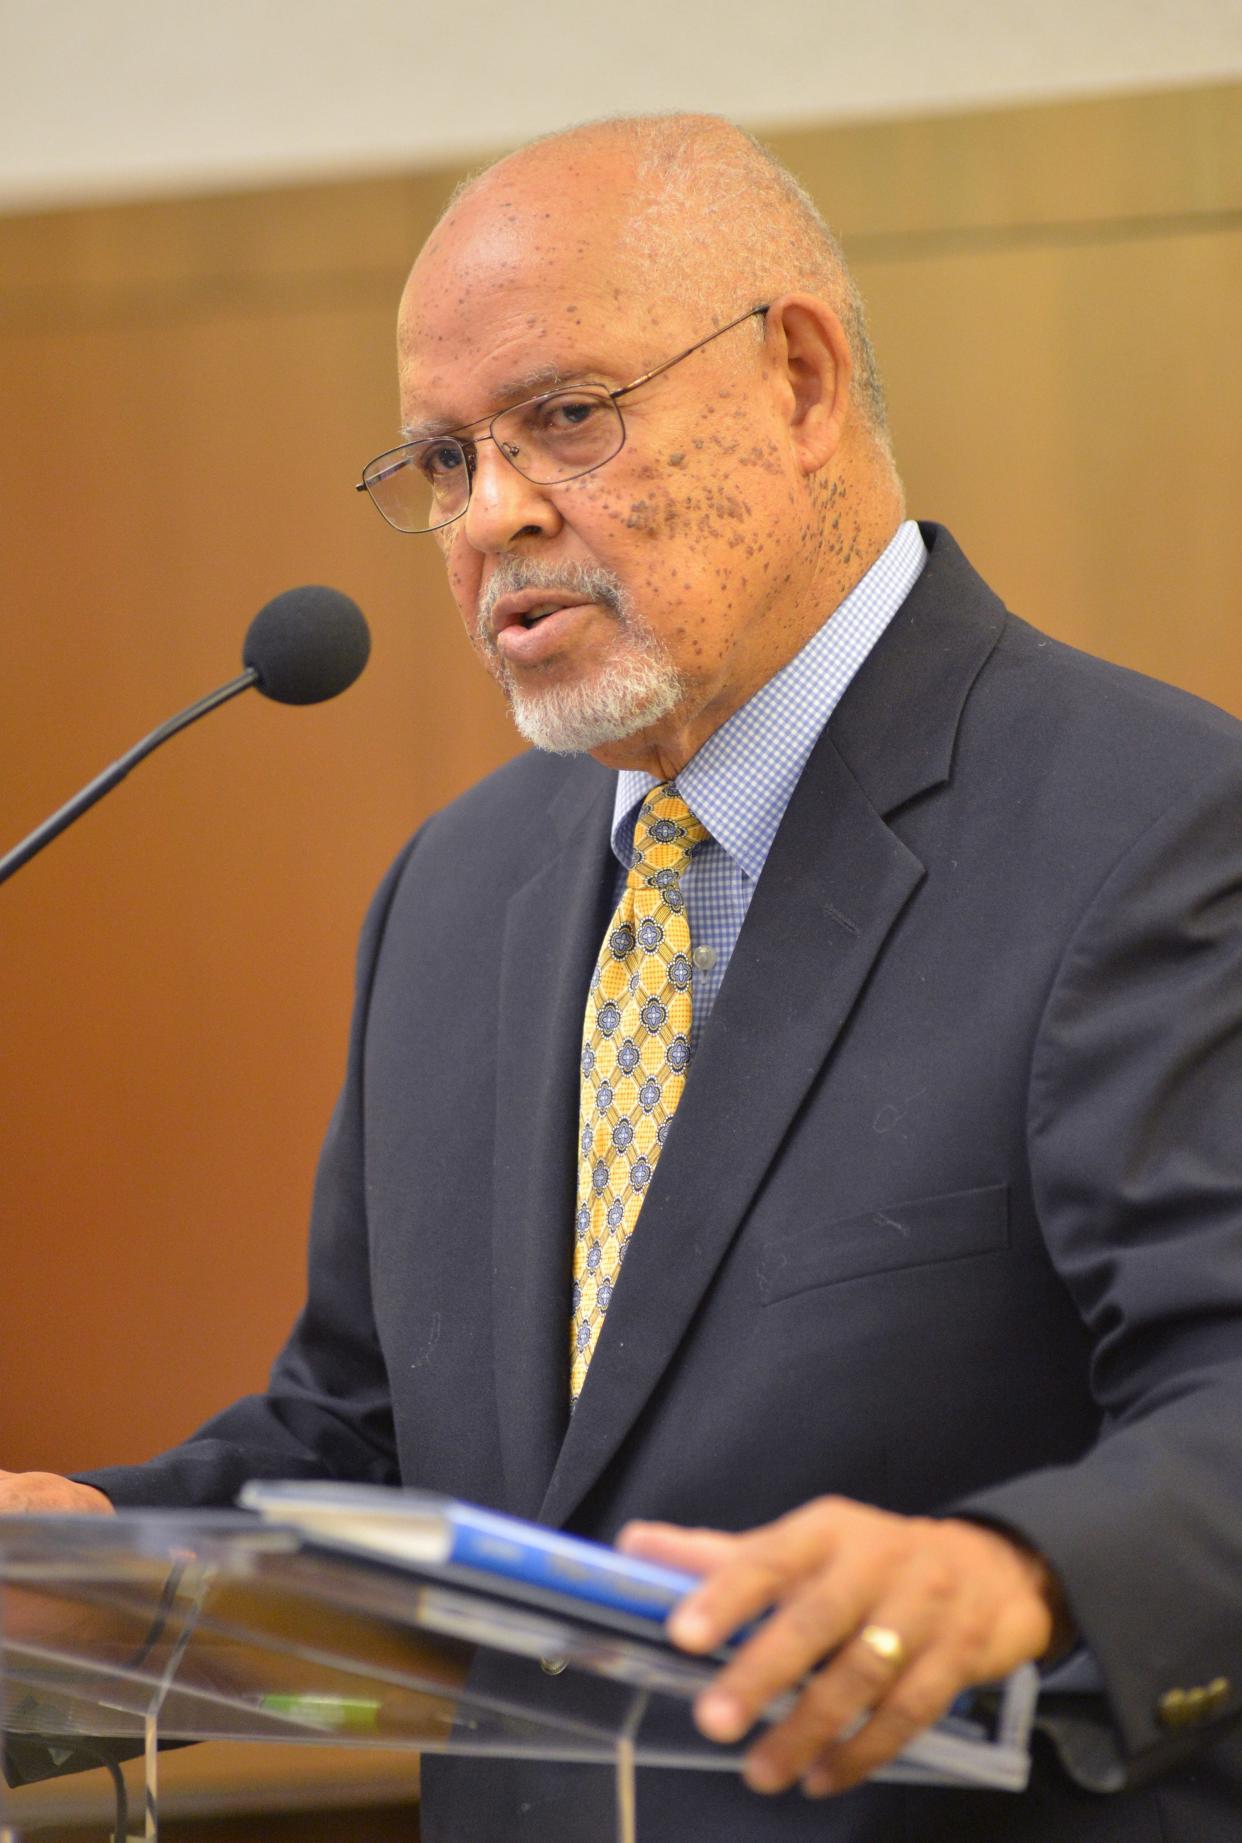 Former U.S. Ambassador to South Africa James A. Joseph, speaks during a session of the Lifelong Learning Academy on the topic of charitable giving on Feb. 9, 2015.